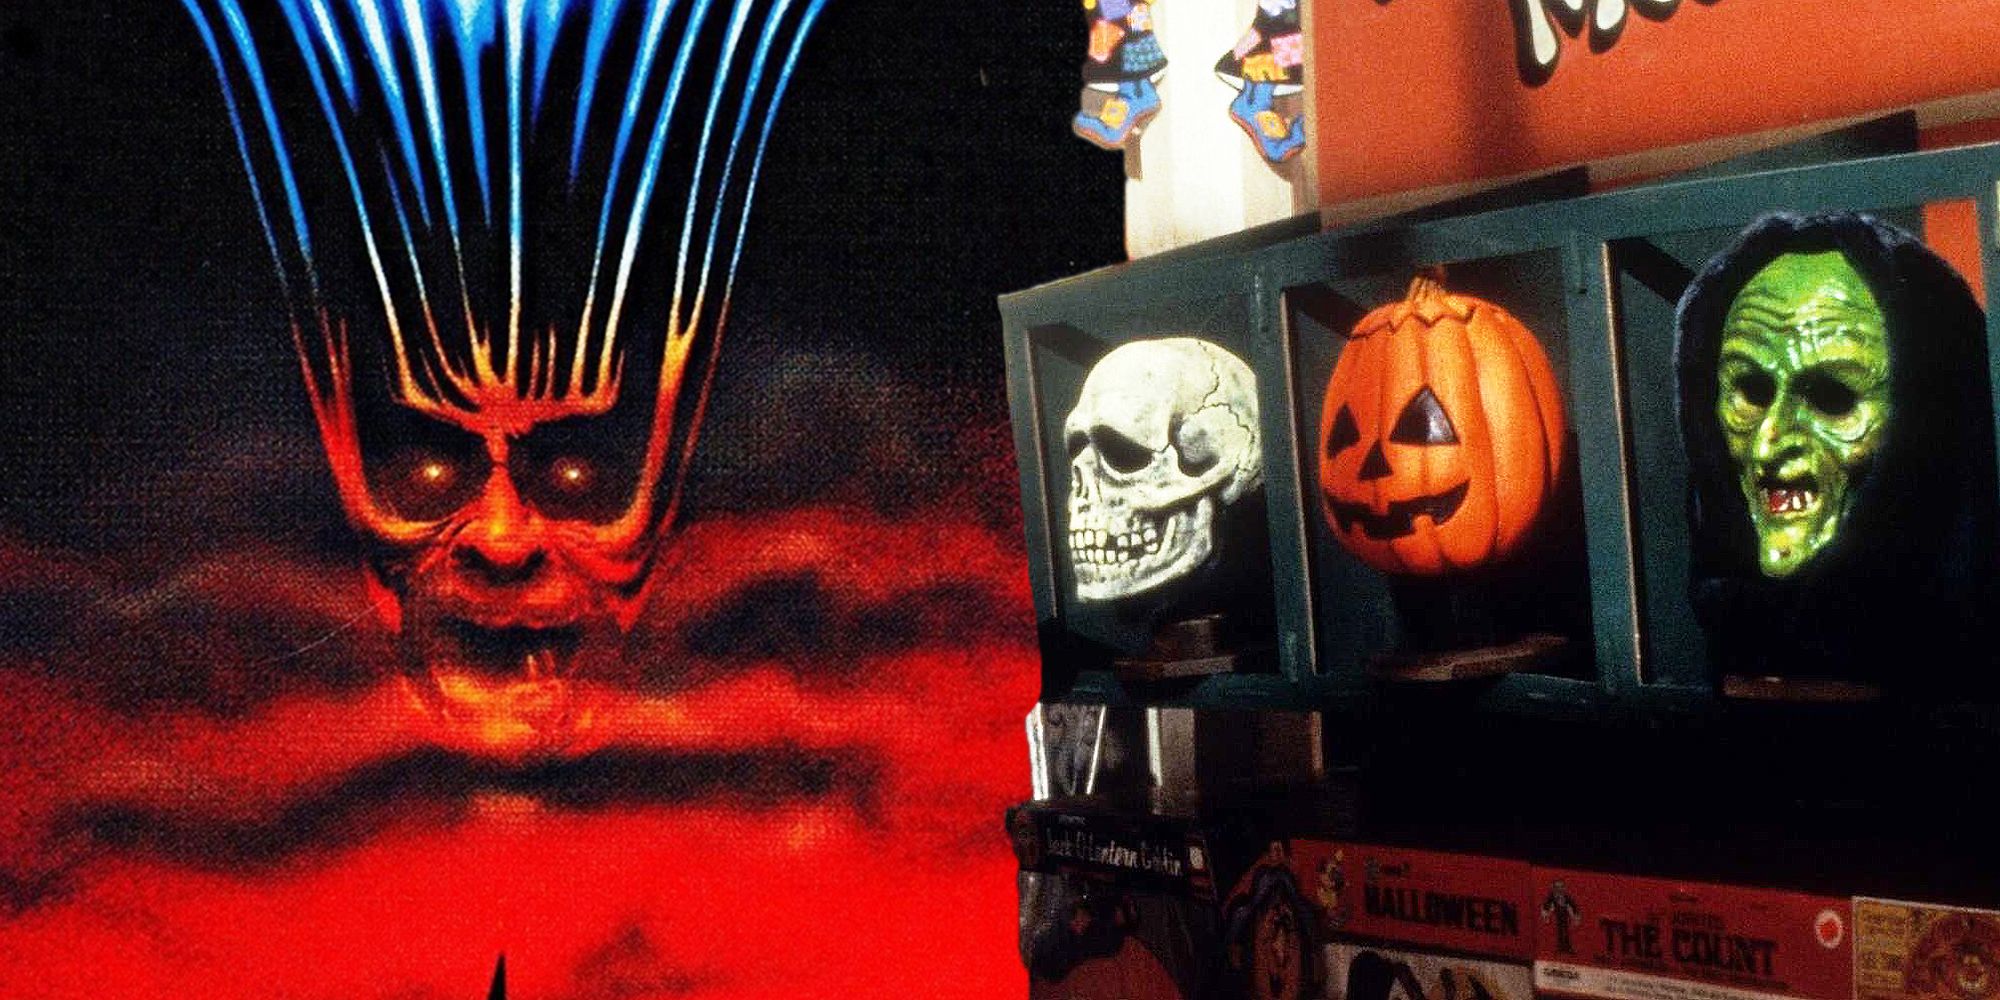 Halloween 3 Explains Its Own Title In The Silliest Way